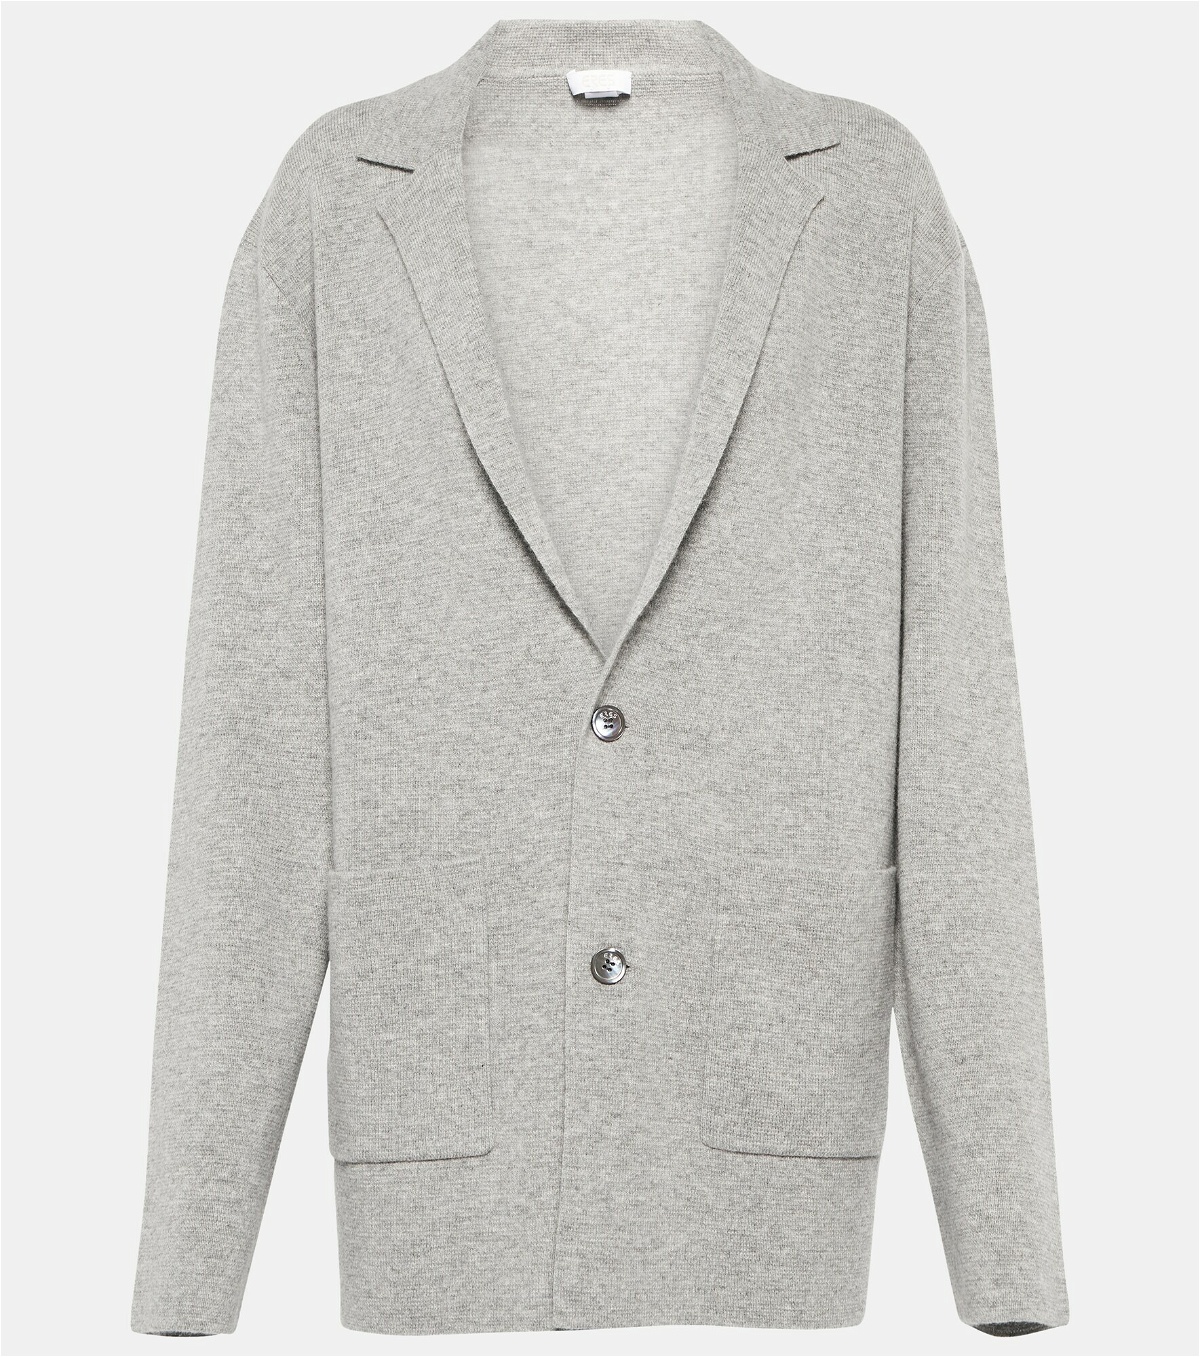 Eres - Claude wool and cashmere blazer ERES